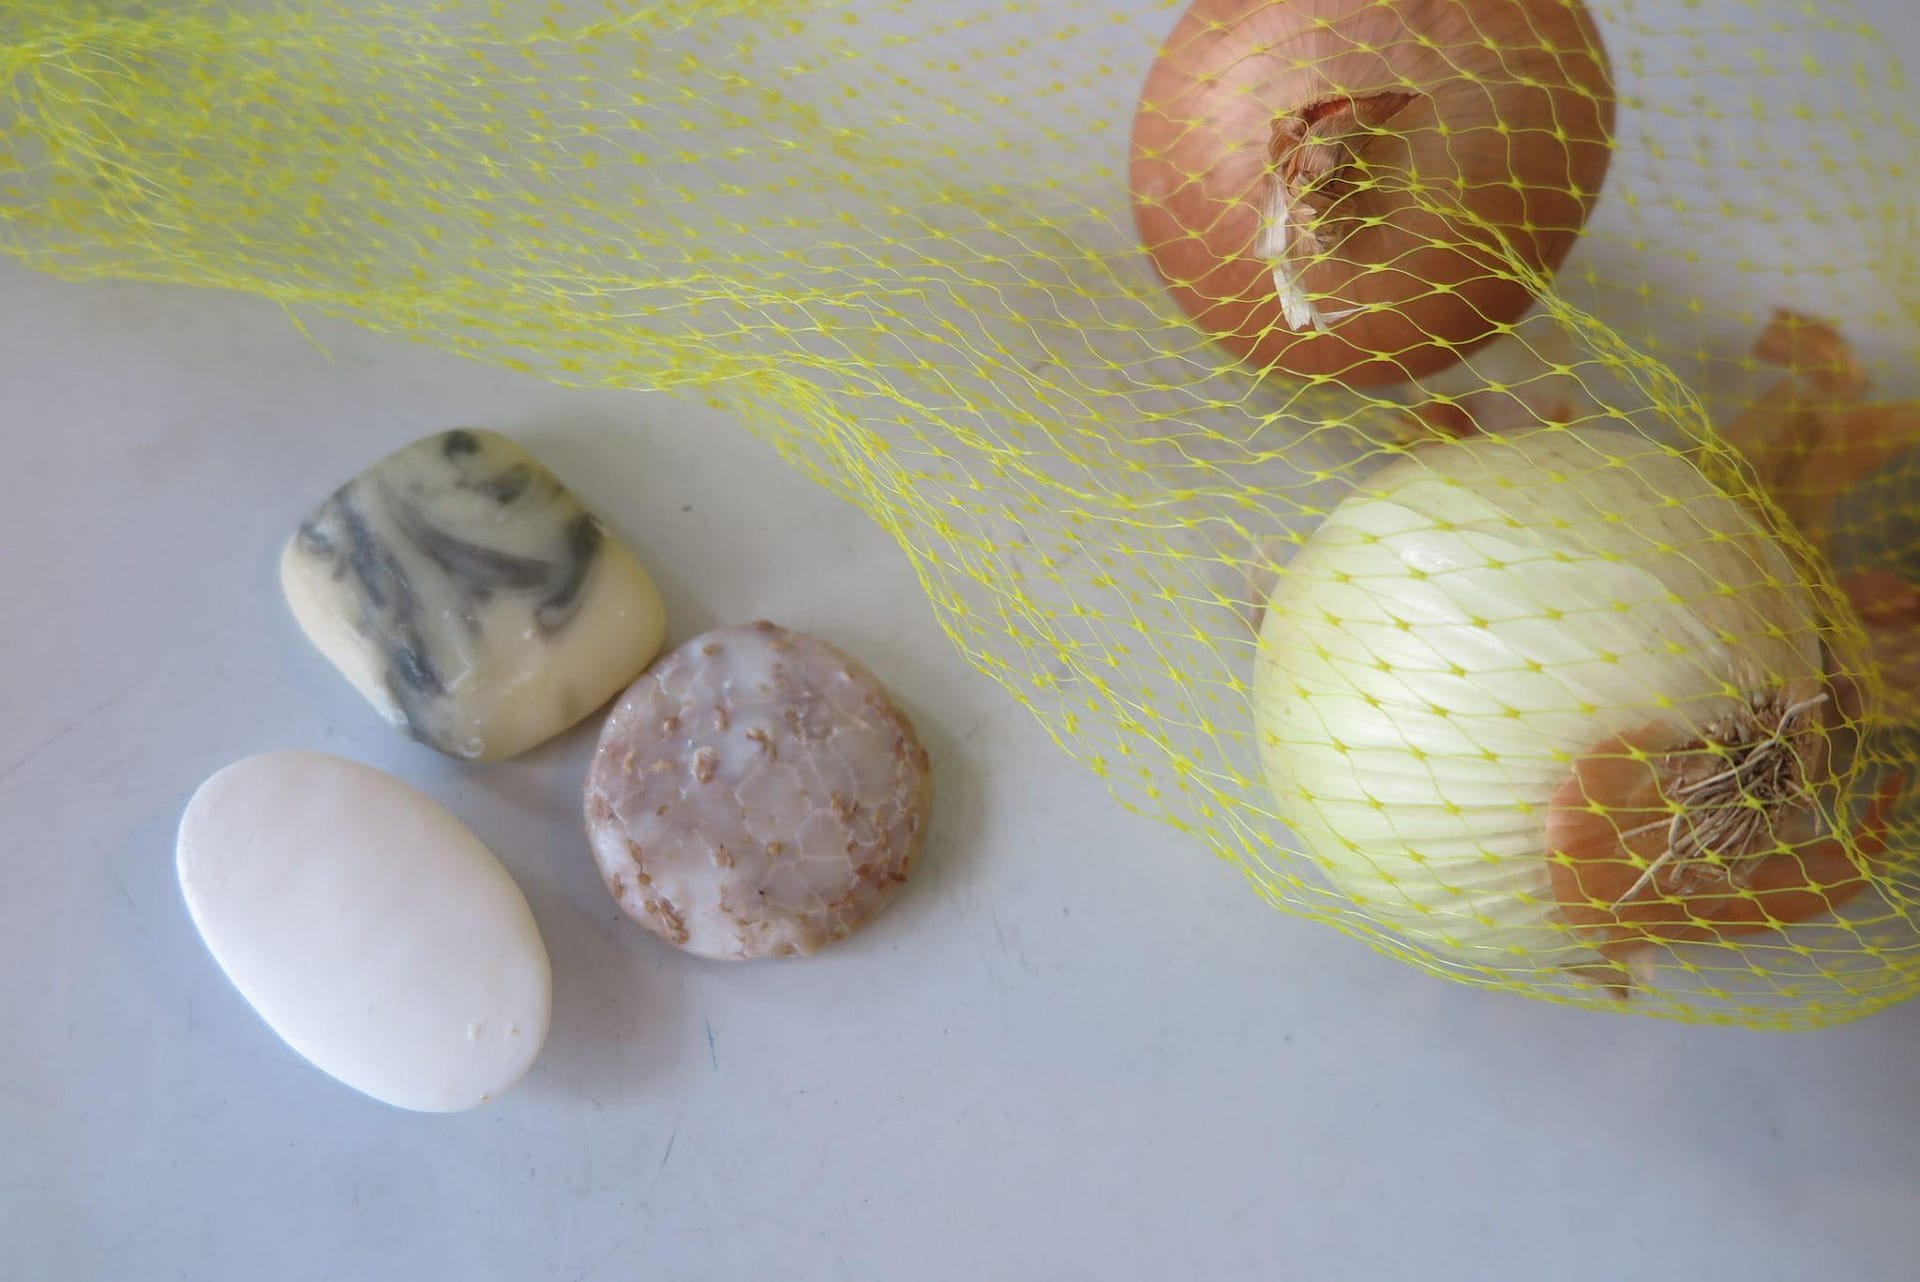 Onions in yellow mesh produce bag next to a few scraps of bar soap